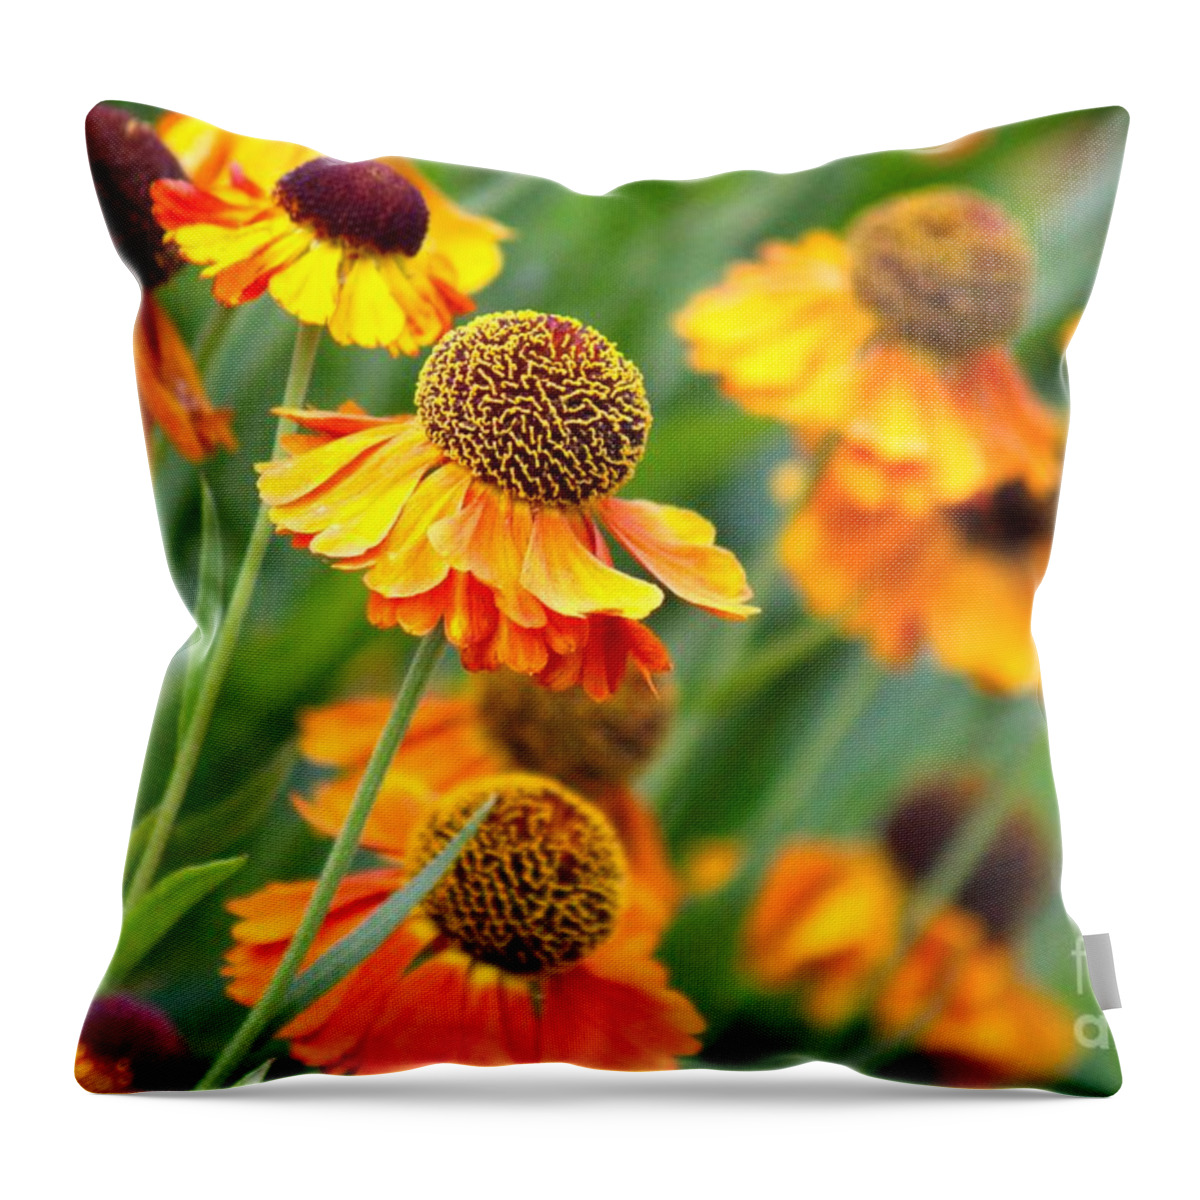 Orange Throw Pillow featuring the photograph Nature's Beauty 87 by Deena Withycombe